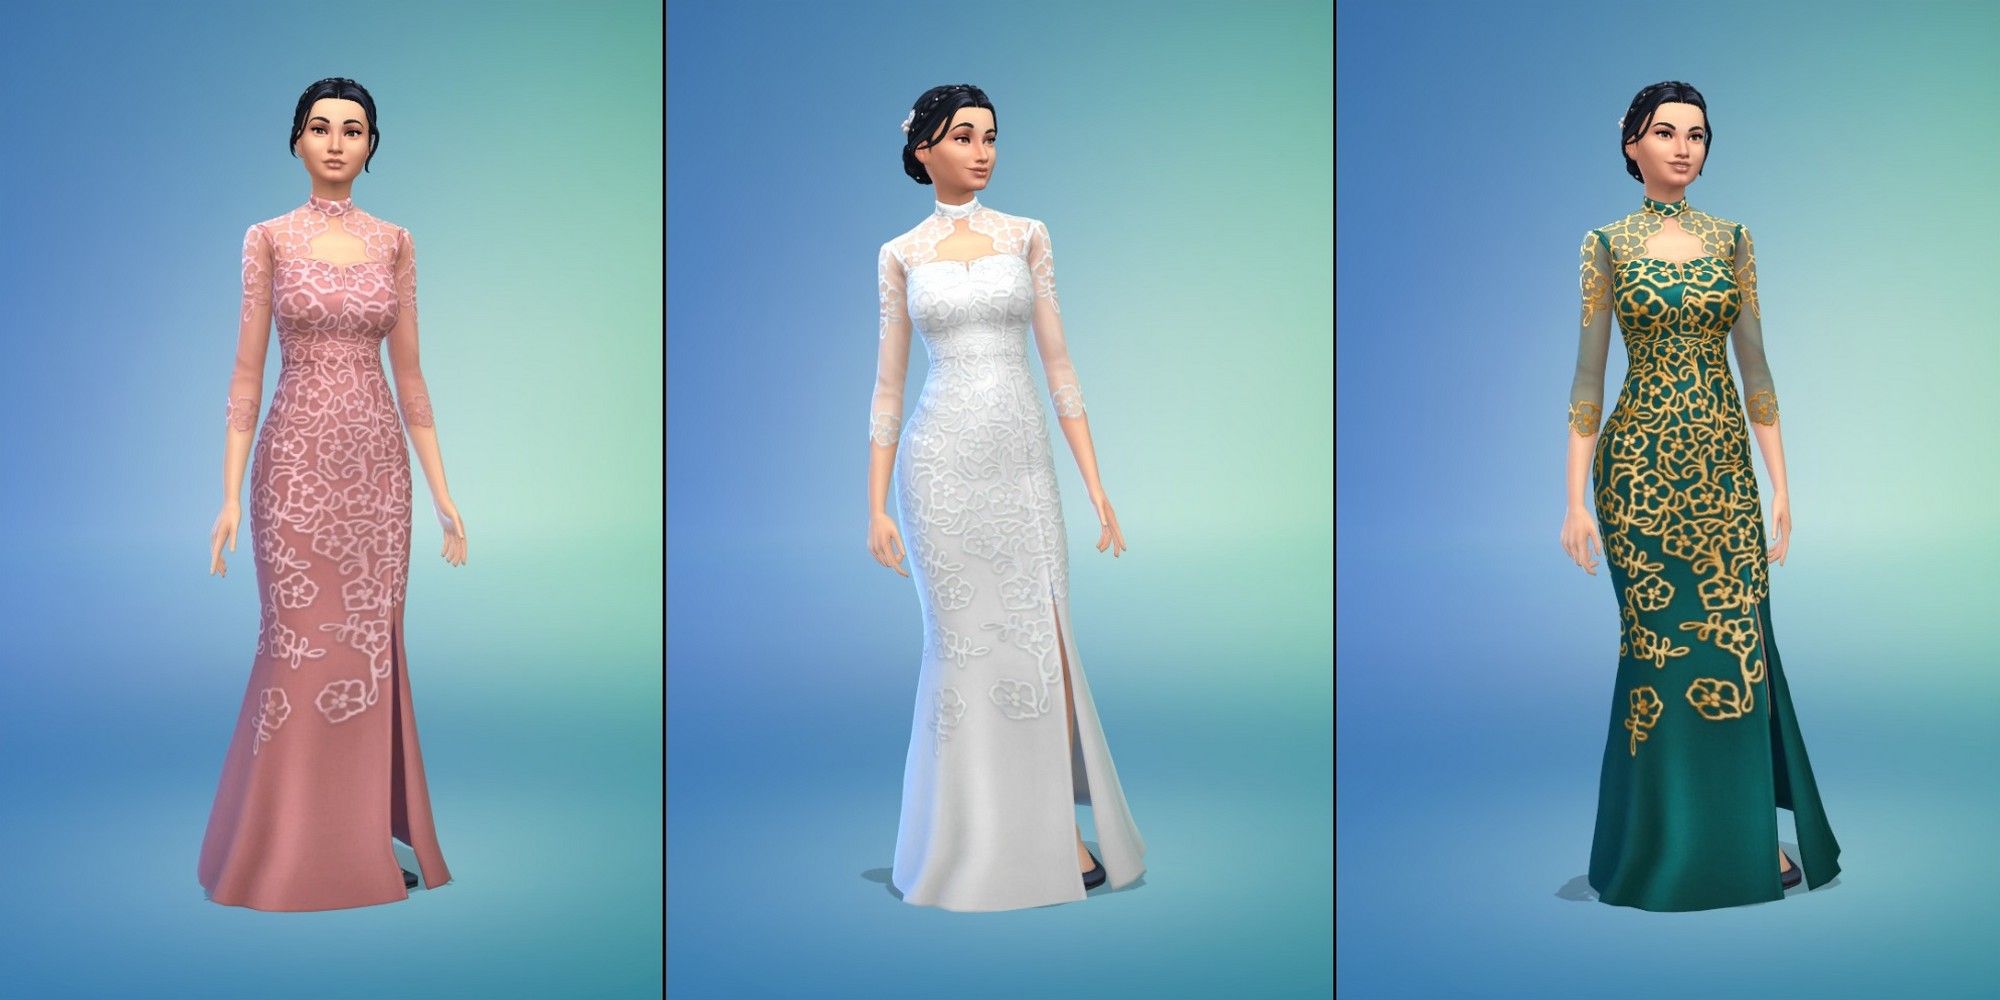 Sims 4 Wedding Dress Open Chest Floral Lace